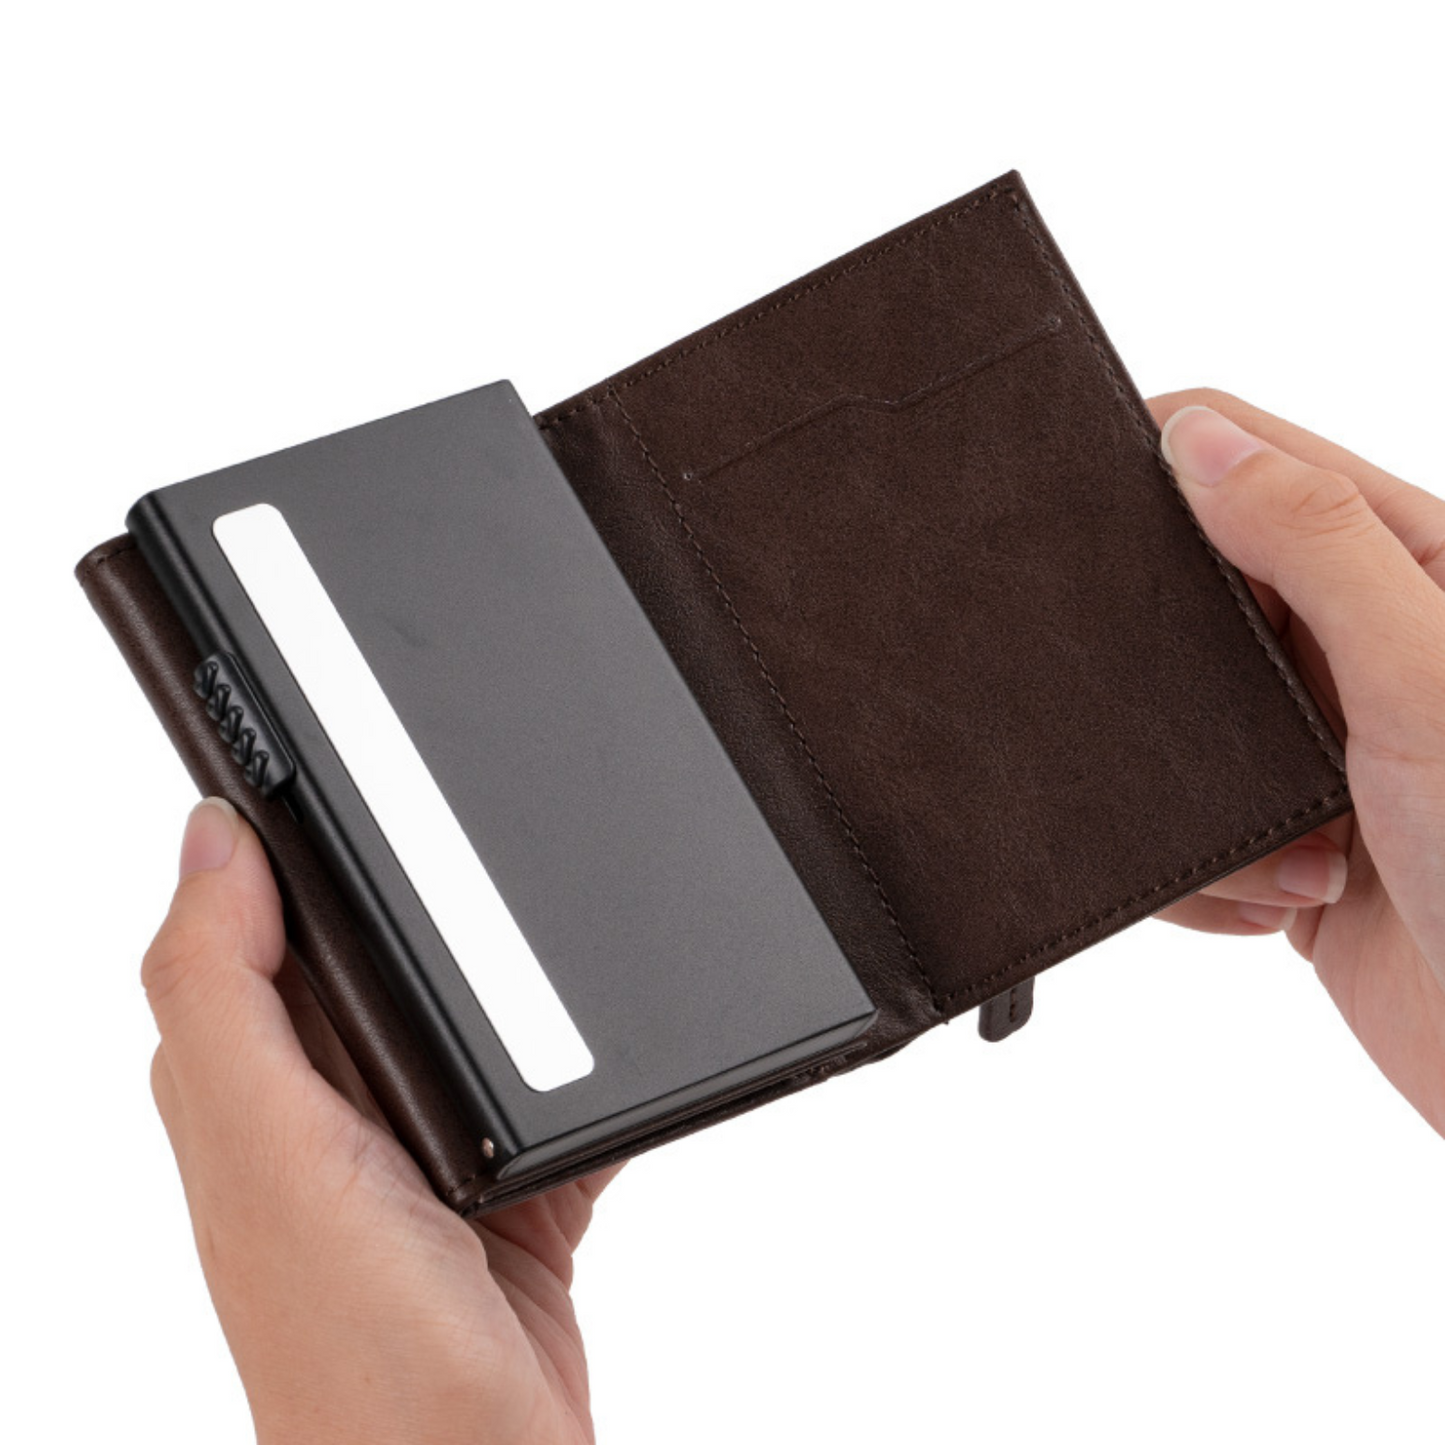 Trifold Leather RFID Pop-Up Wallet with Coin Pocket